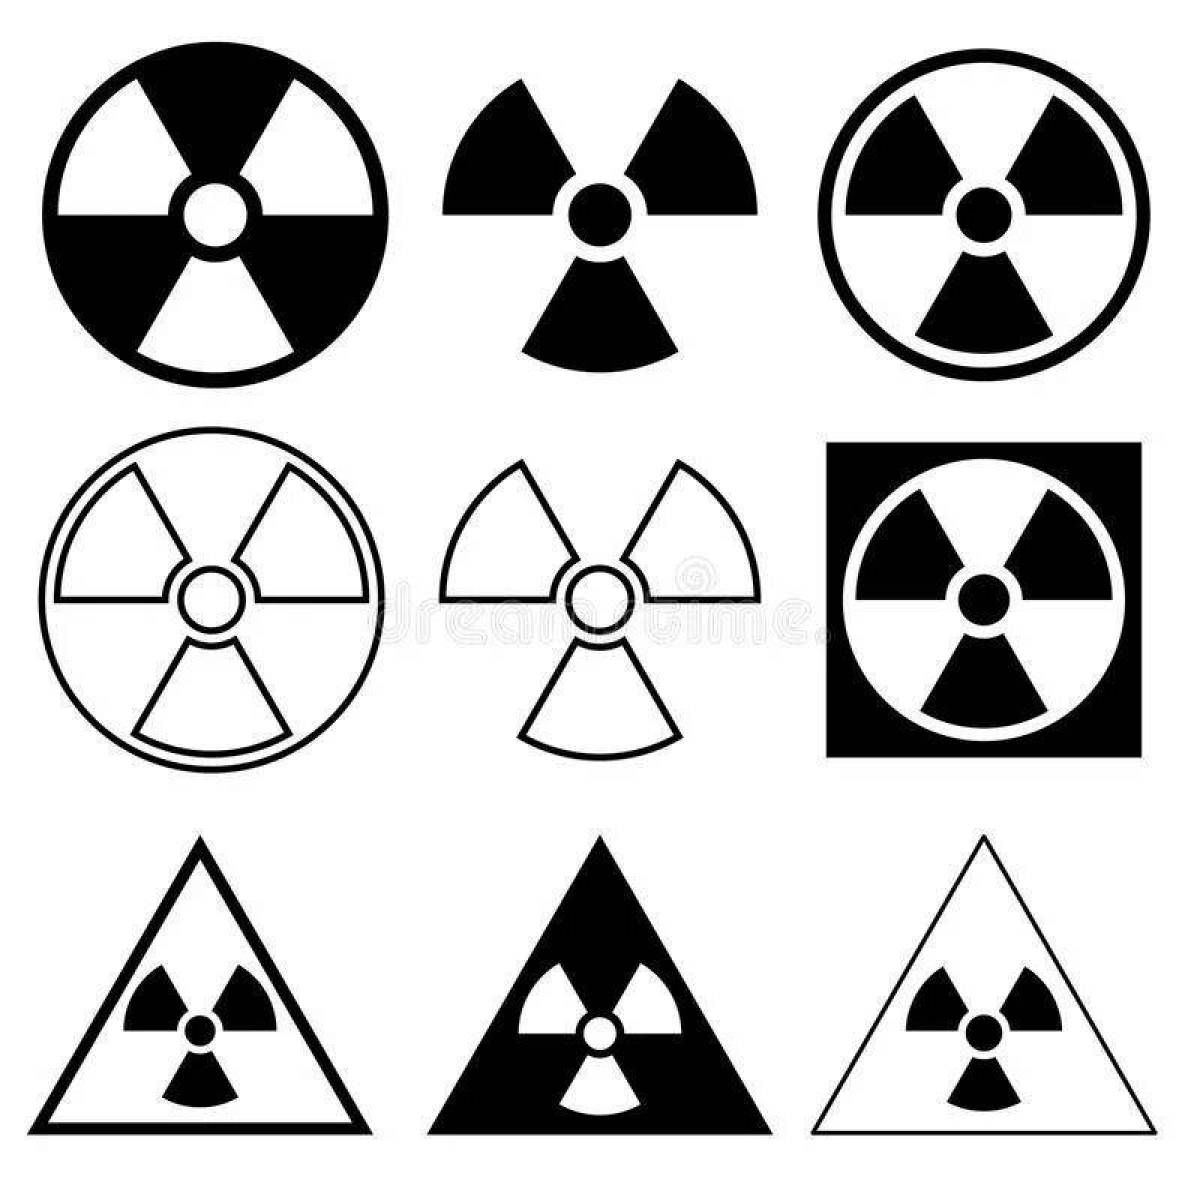 Attractive coloring of the sign of radiation